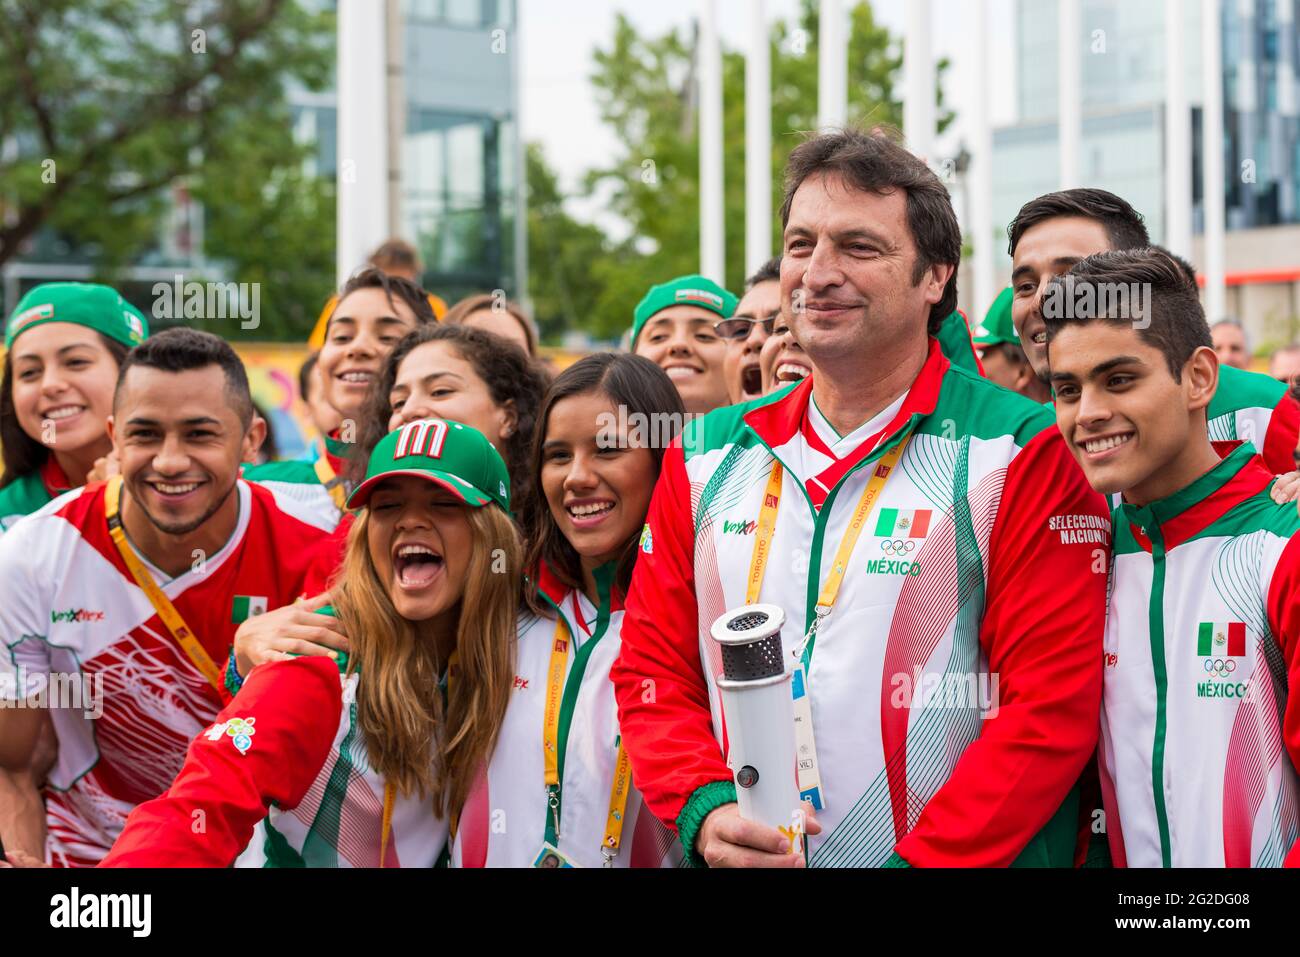 Mexican Athletes In Joyful Mood Posing For Photograph Holding The Pan